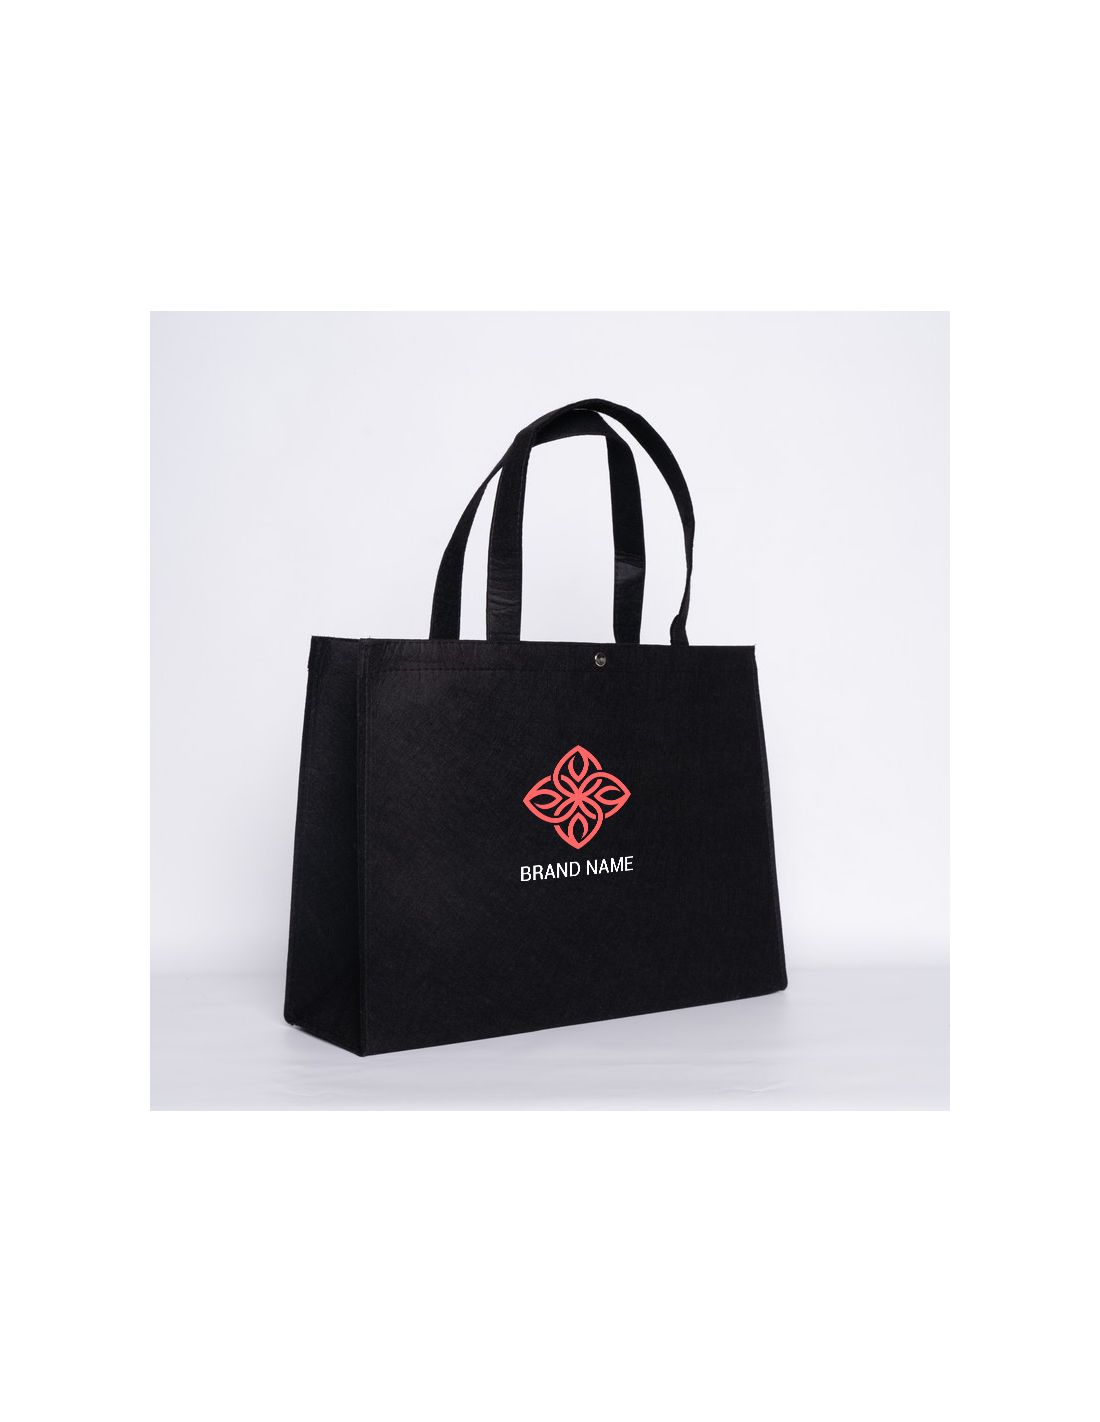 Customized Personalized reusable felt bag 45x13x33 CM | FELT SHOPPING BAG | SCREEN PRINTING ON TWO SIDES IN TWO COLOURS